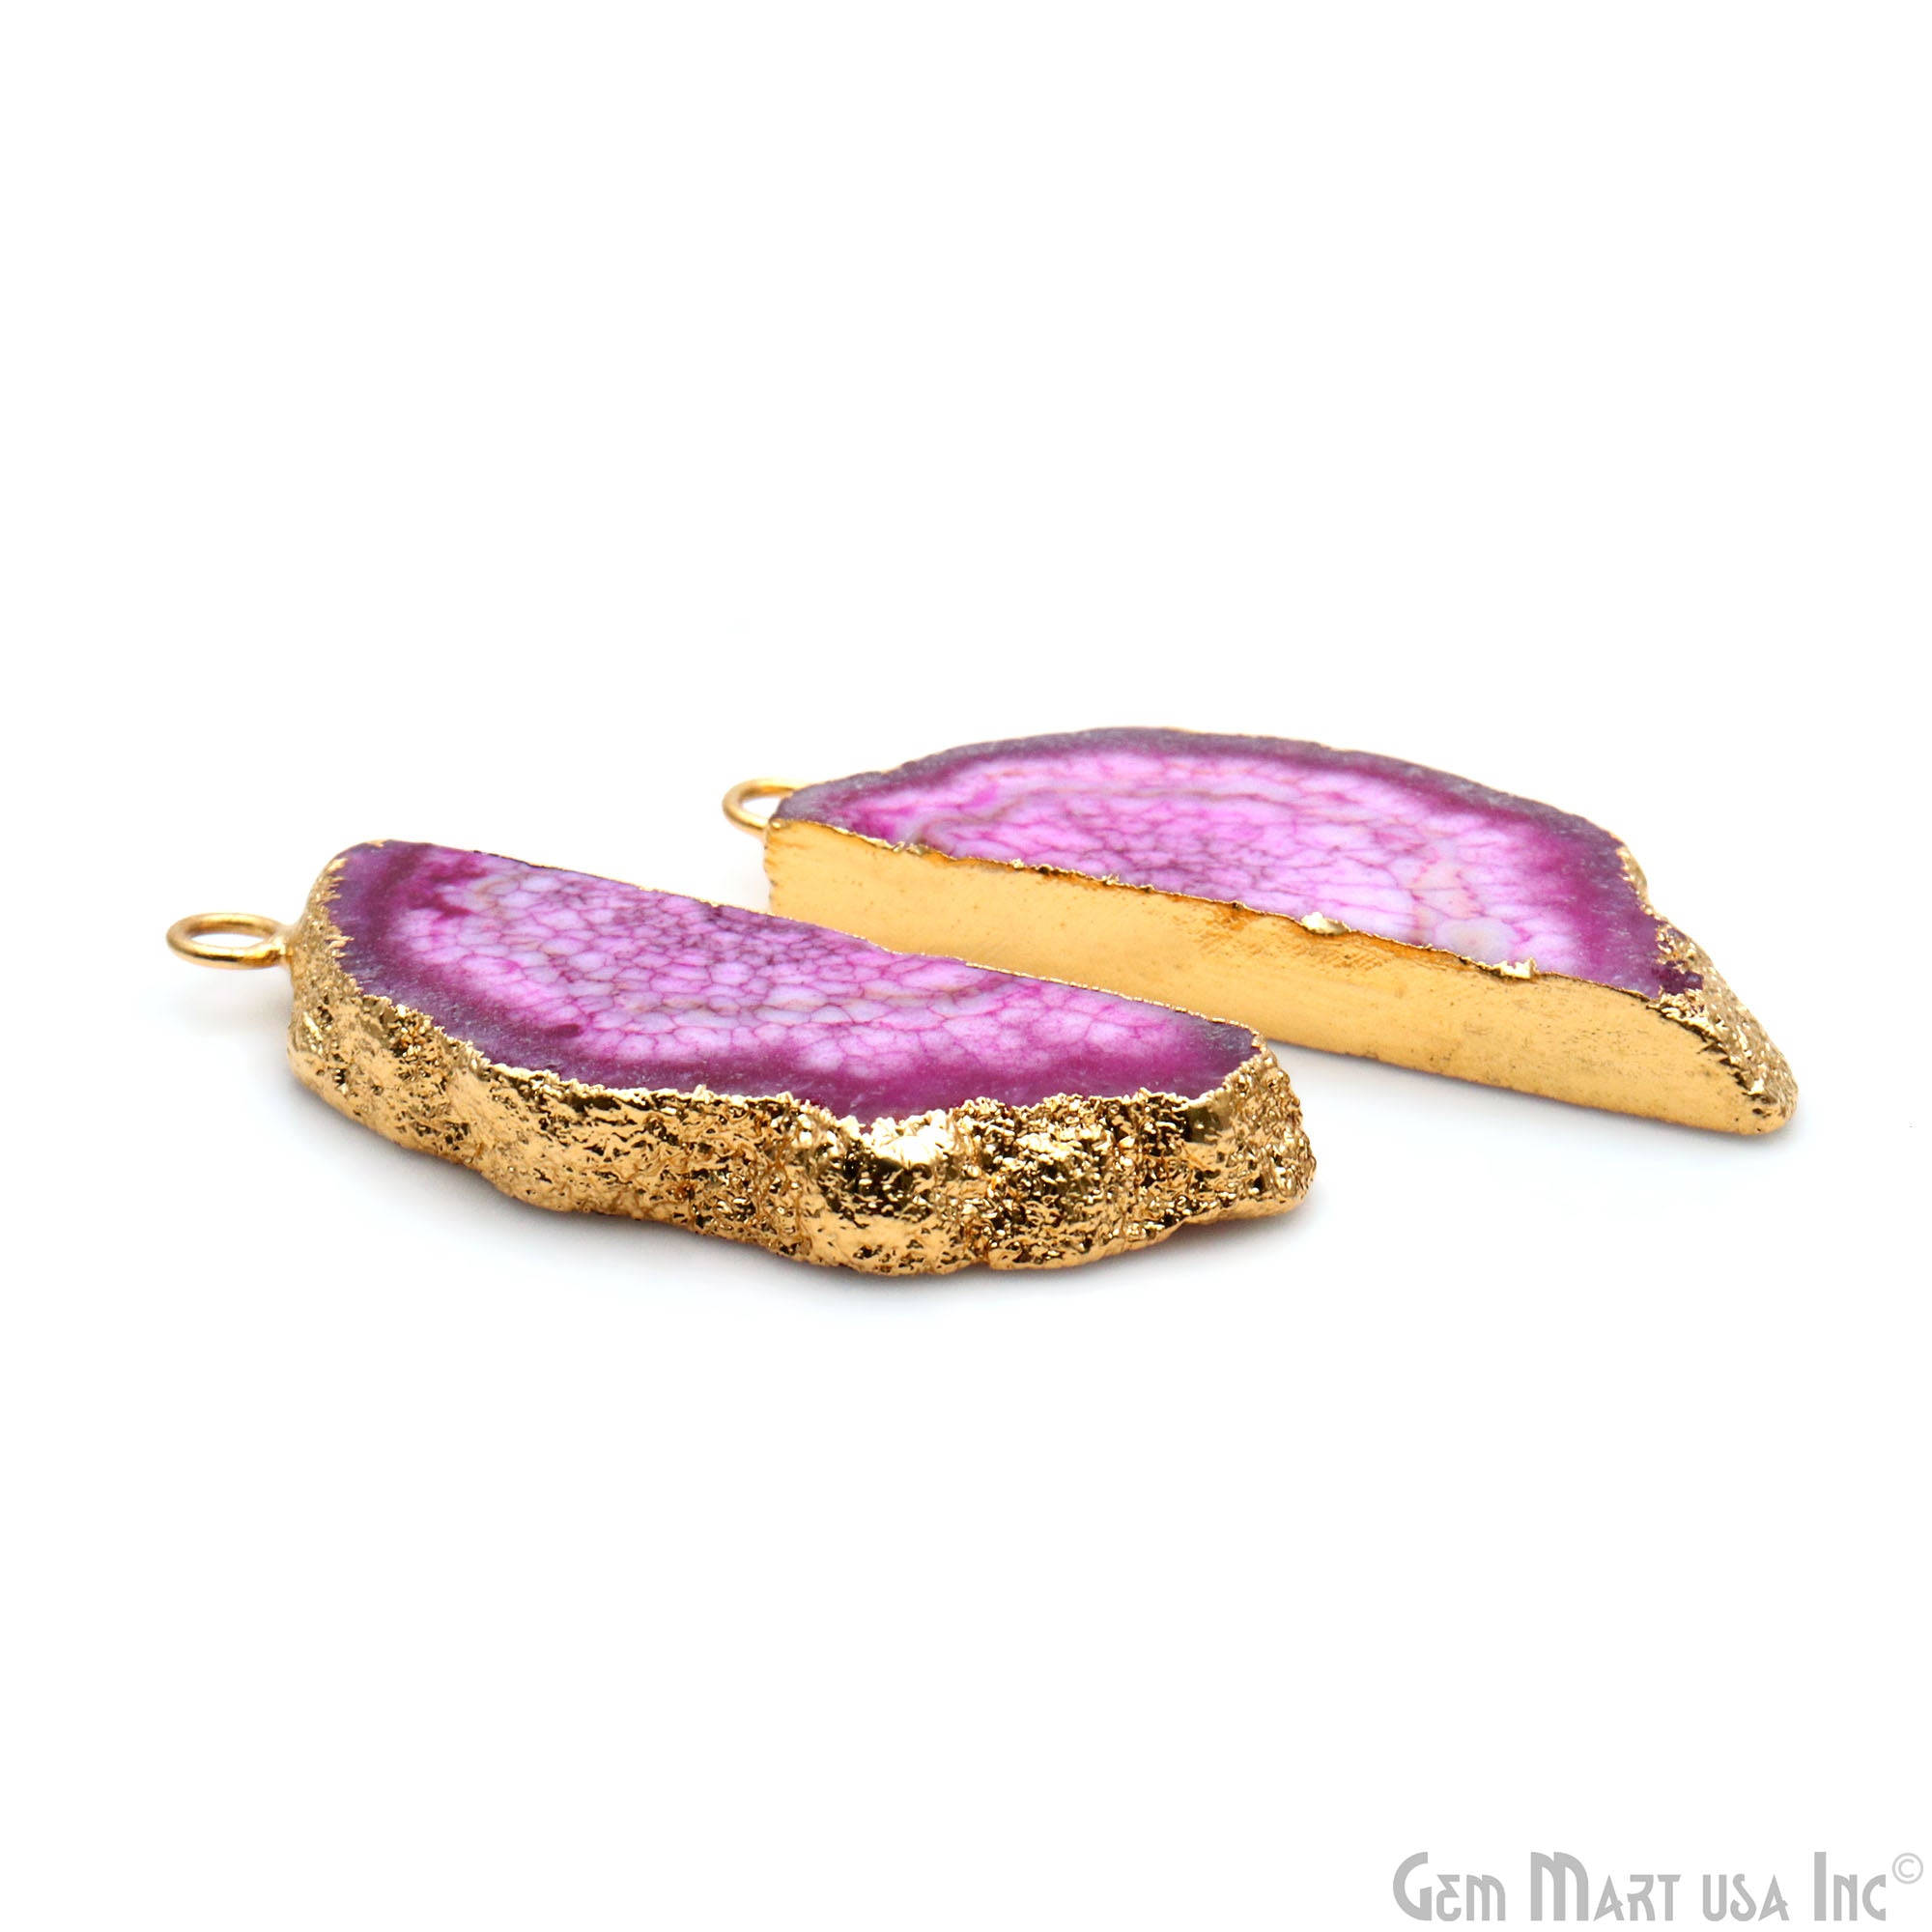 Agate Slice 44x15mm Organic Gold Electroplated Gemstone Earring Connector 1 Pair